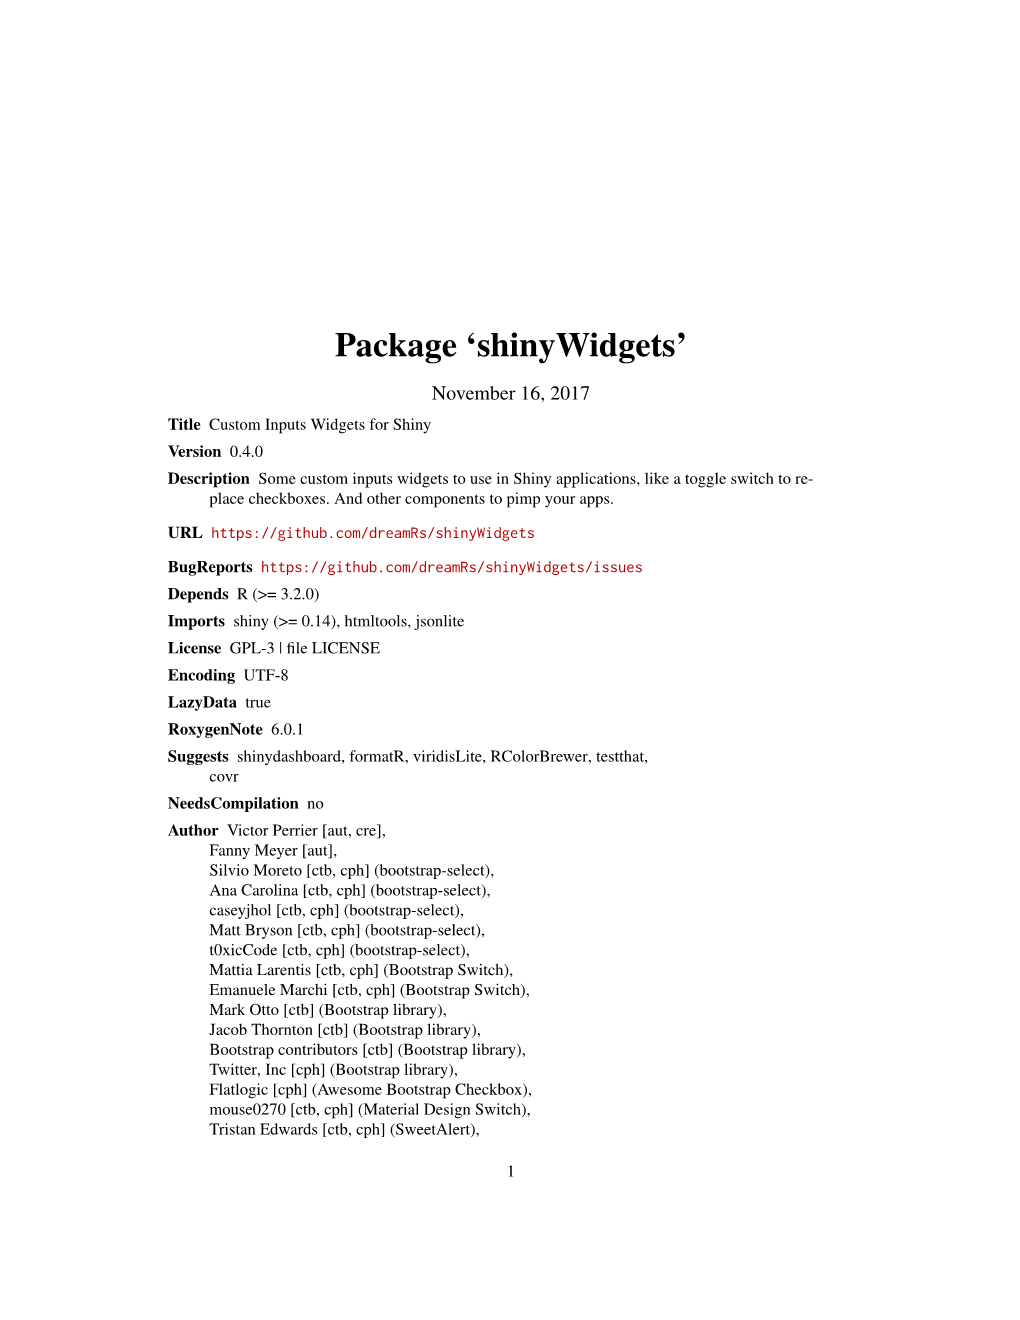 Package 'Shinywidgets'